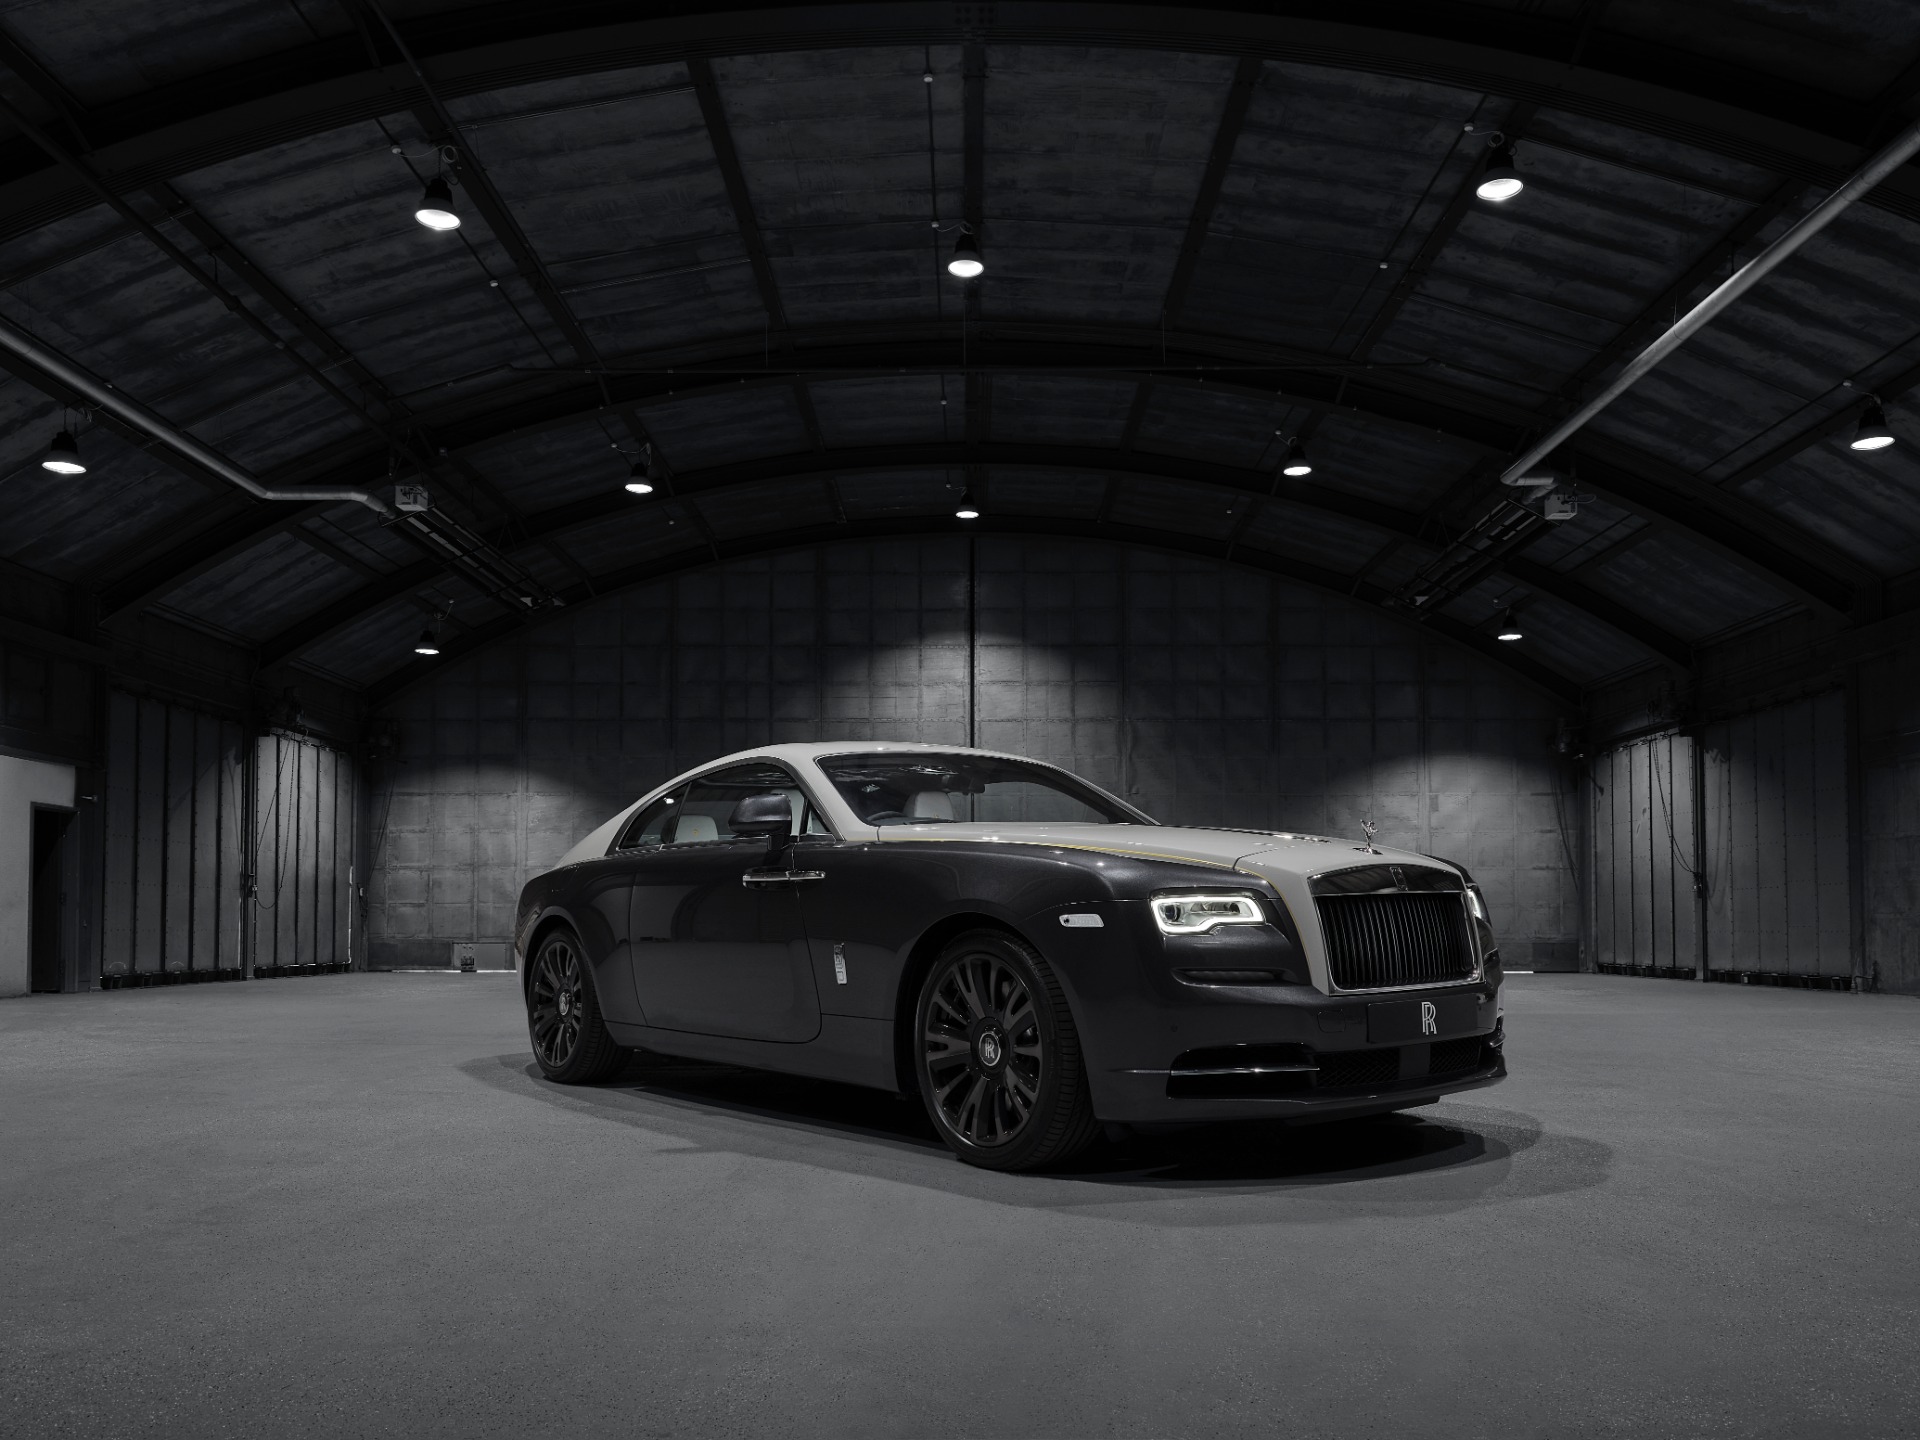 New 2020 Rolls-Royce Wraith Eagle for sale Sold at Pagani of Greenwich in Greenwich CT 06830 1